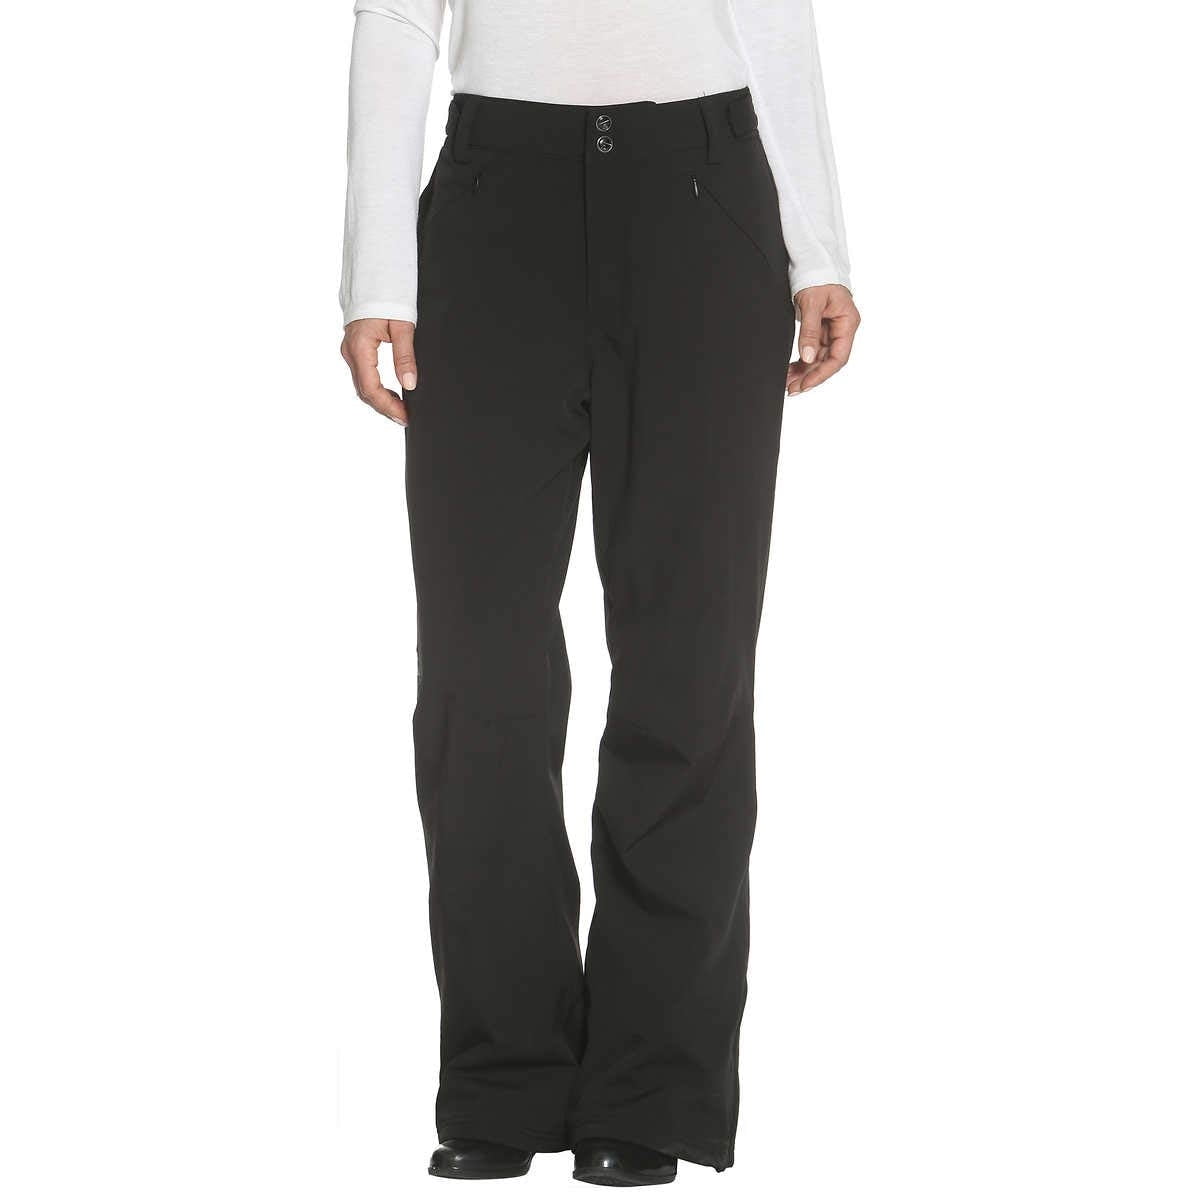 NEW! Gerry Women's Stretch Snow Pants Variety #114 